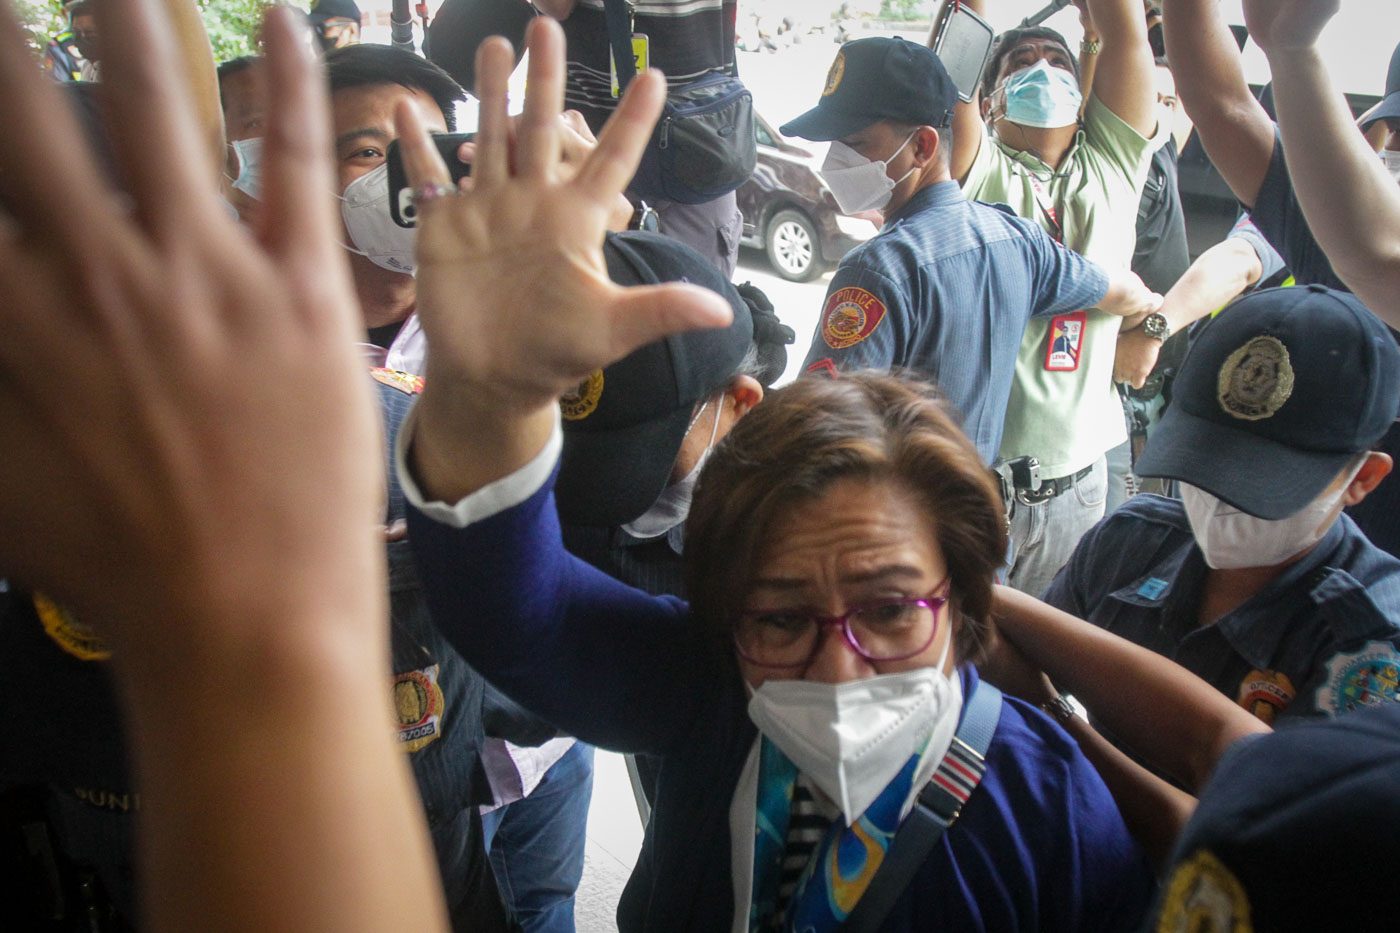 After witnesses retracted allegations, De Lima again asks court to junk case